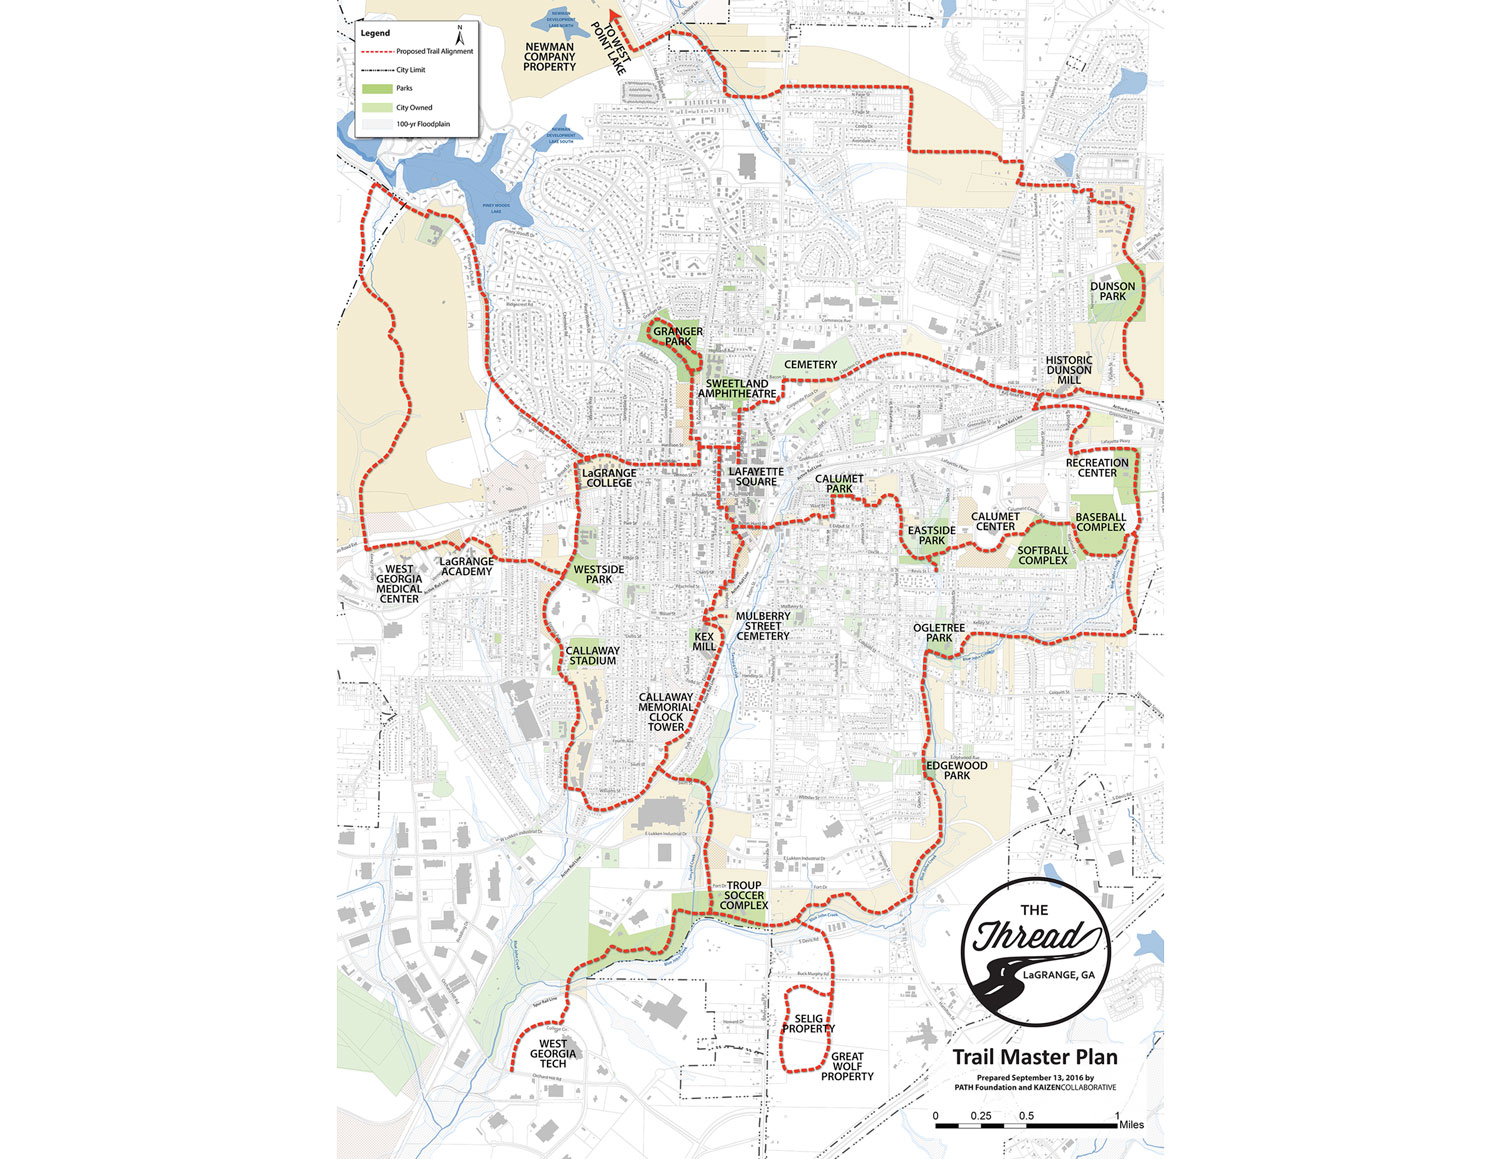  The Thread Trail master plan suggests 29 miles of greenway trails to reconnect the city on a human scale. 